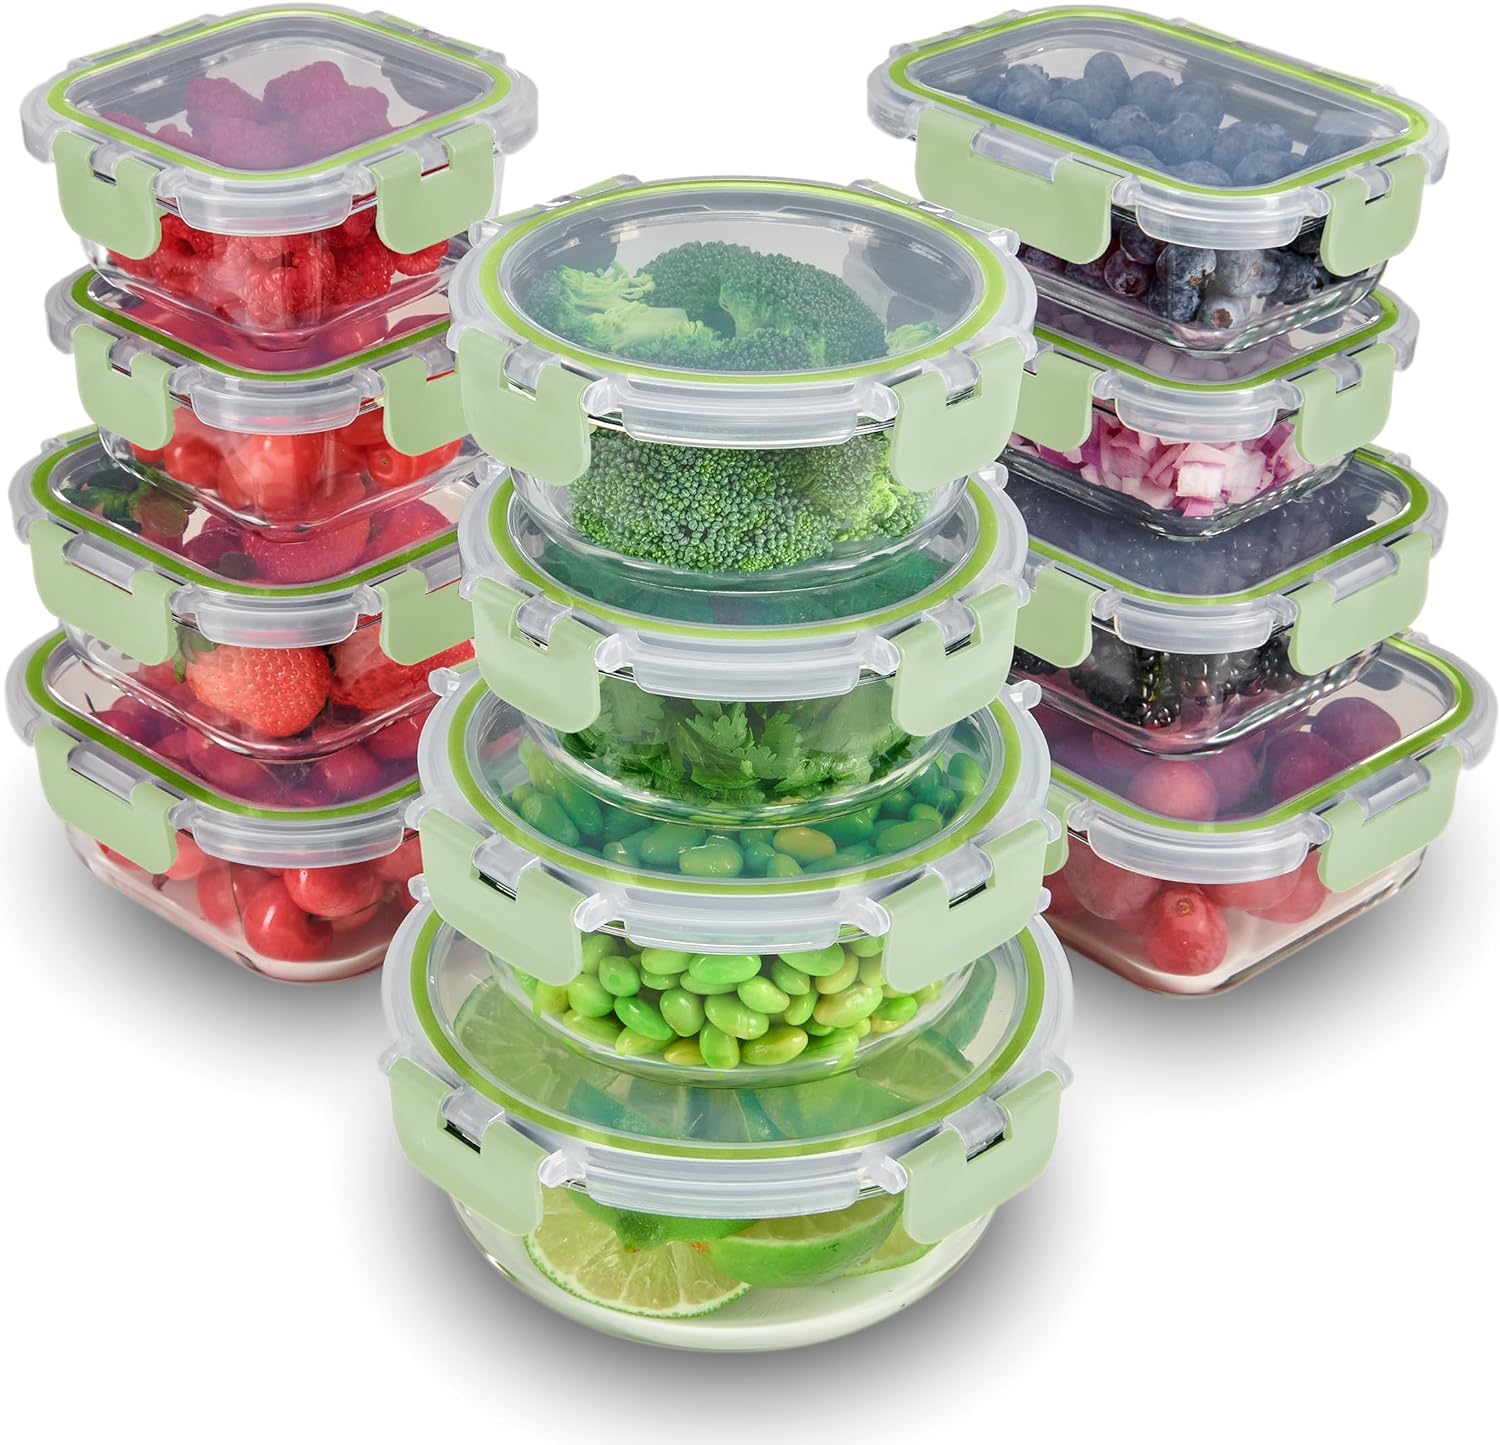 FineDine 24 Piece Glass Storage Containers with Lids - Leak Proof, Dishwasher Safe Glass Food Storage Containers for Meal Prep or Leftovers, Green